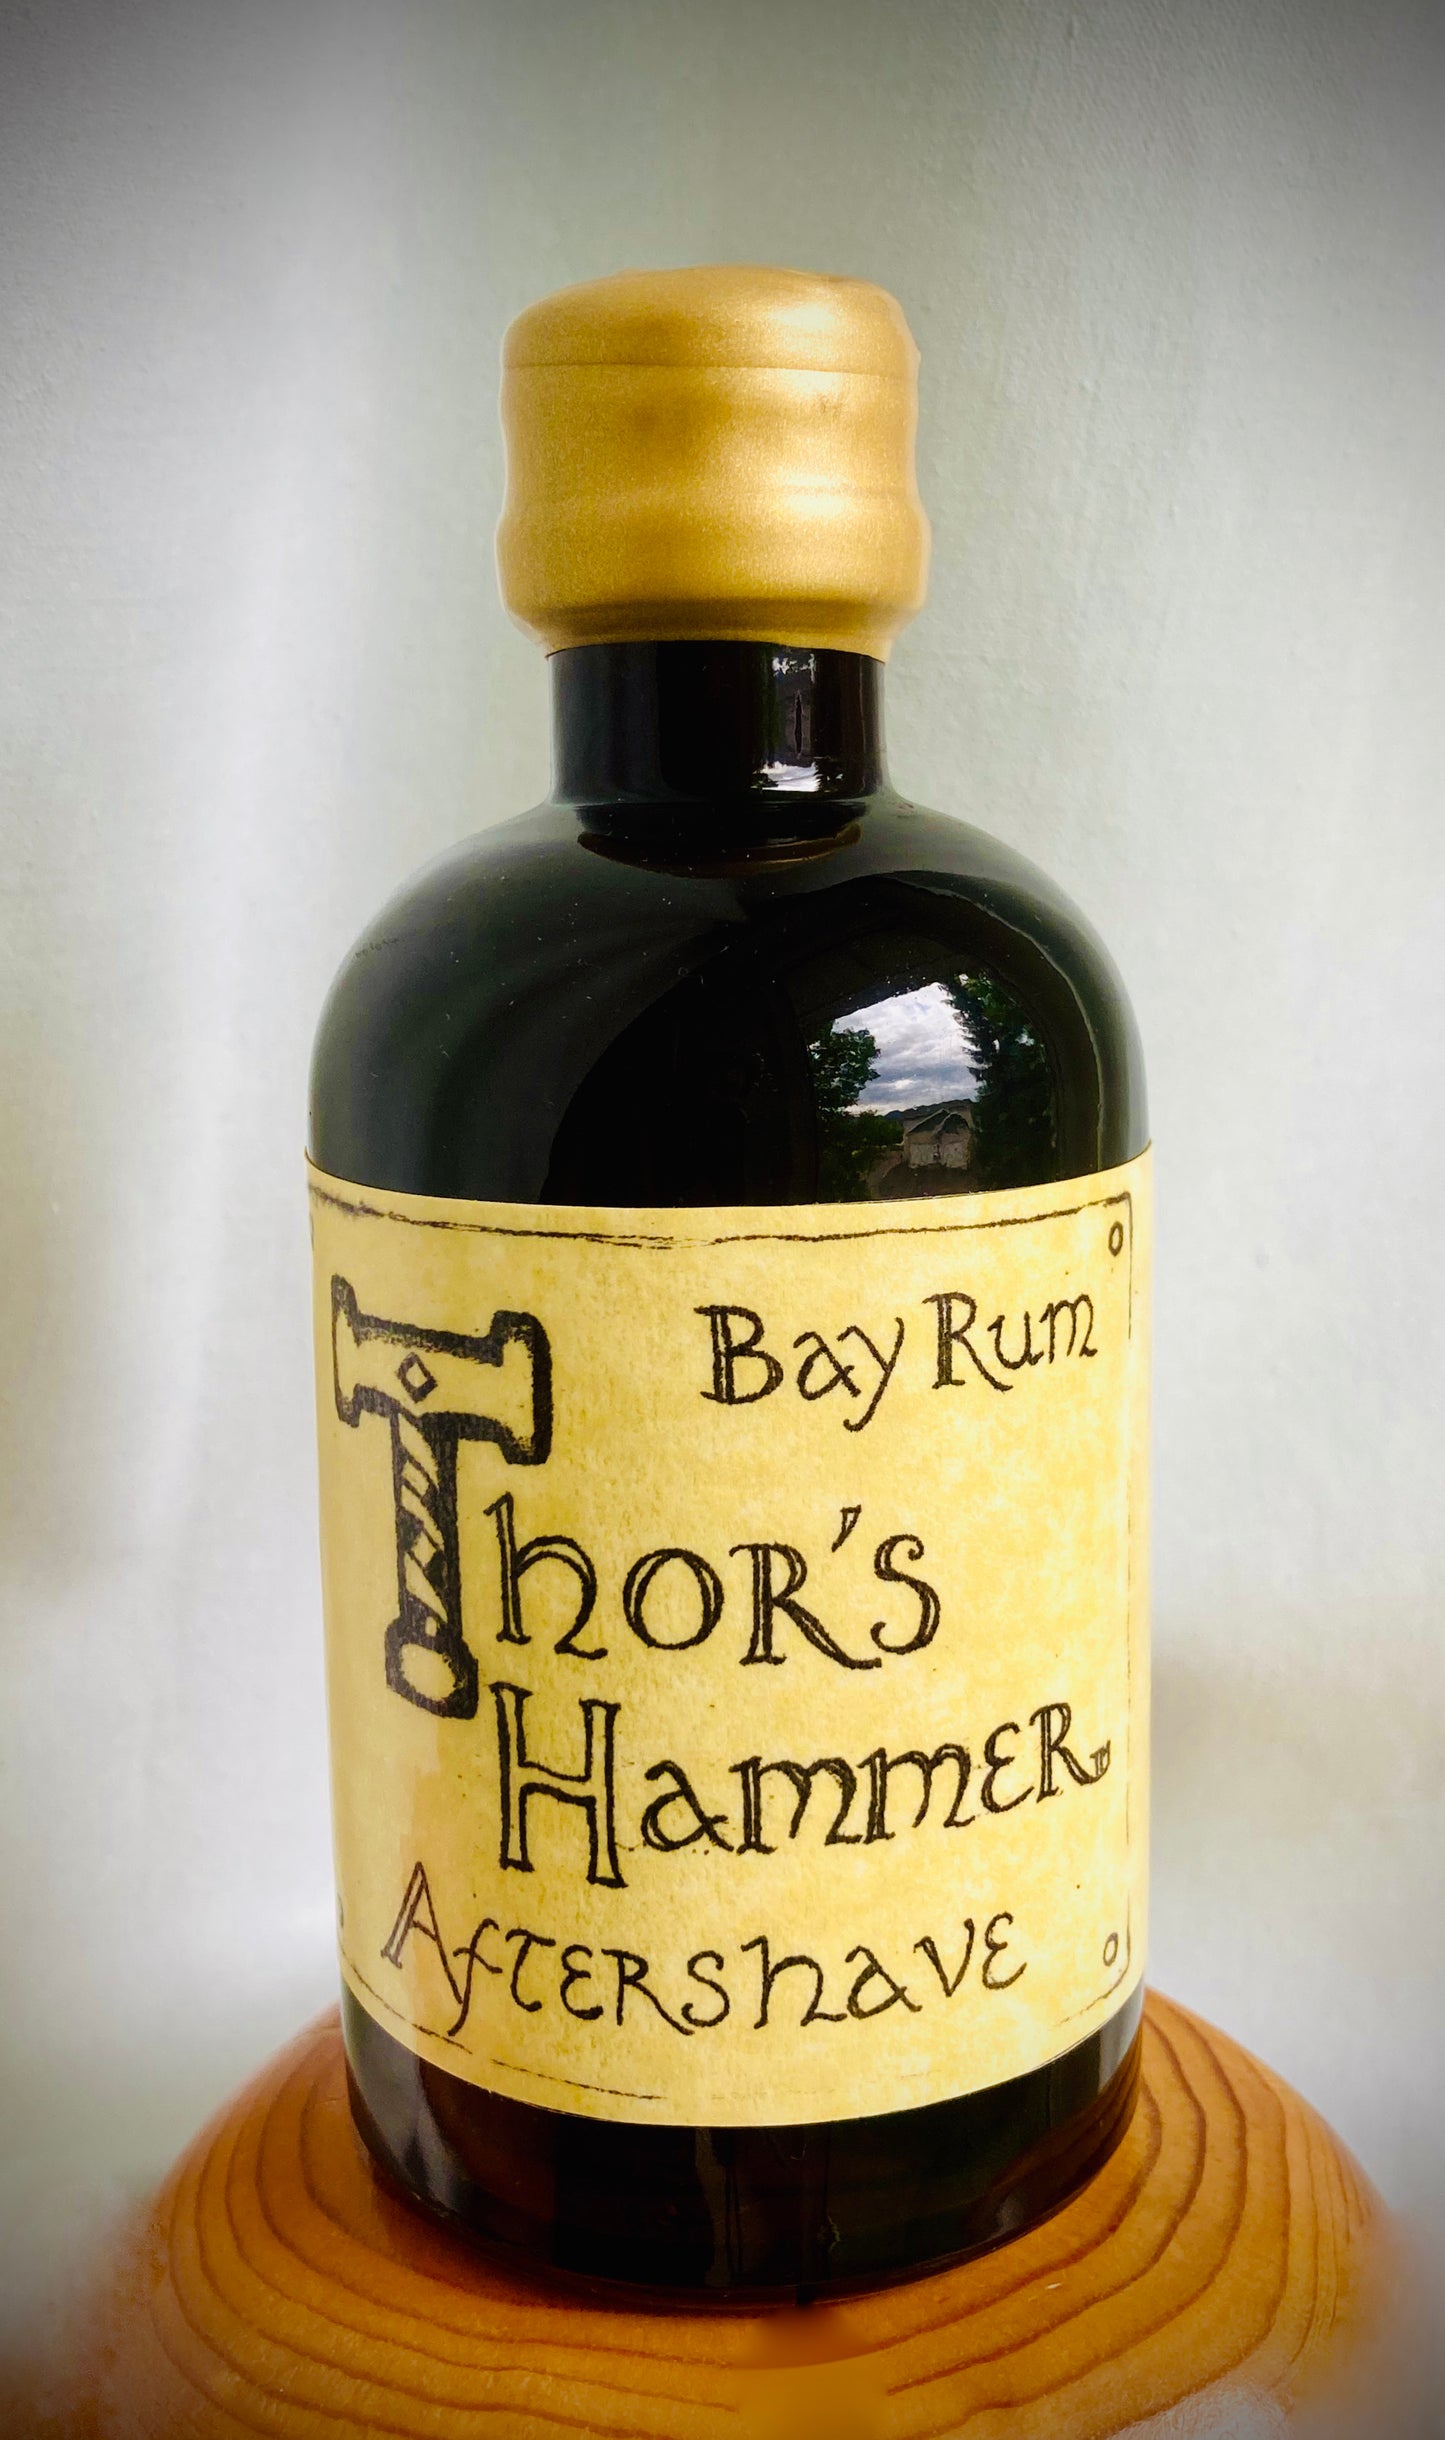 Thor's Hammer Bay Rum Aftershave | NEW Amber Limited Edition with Cork Top | 8 oz